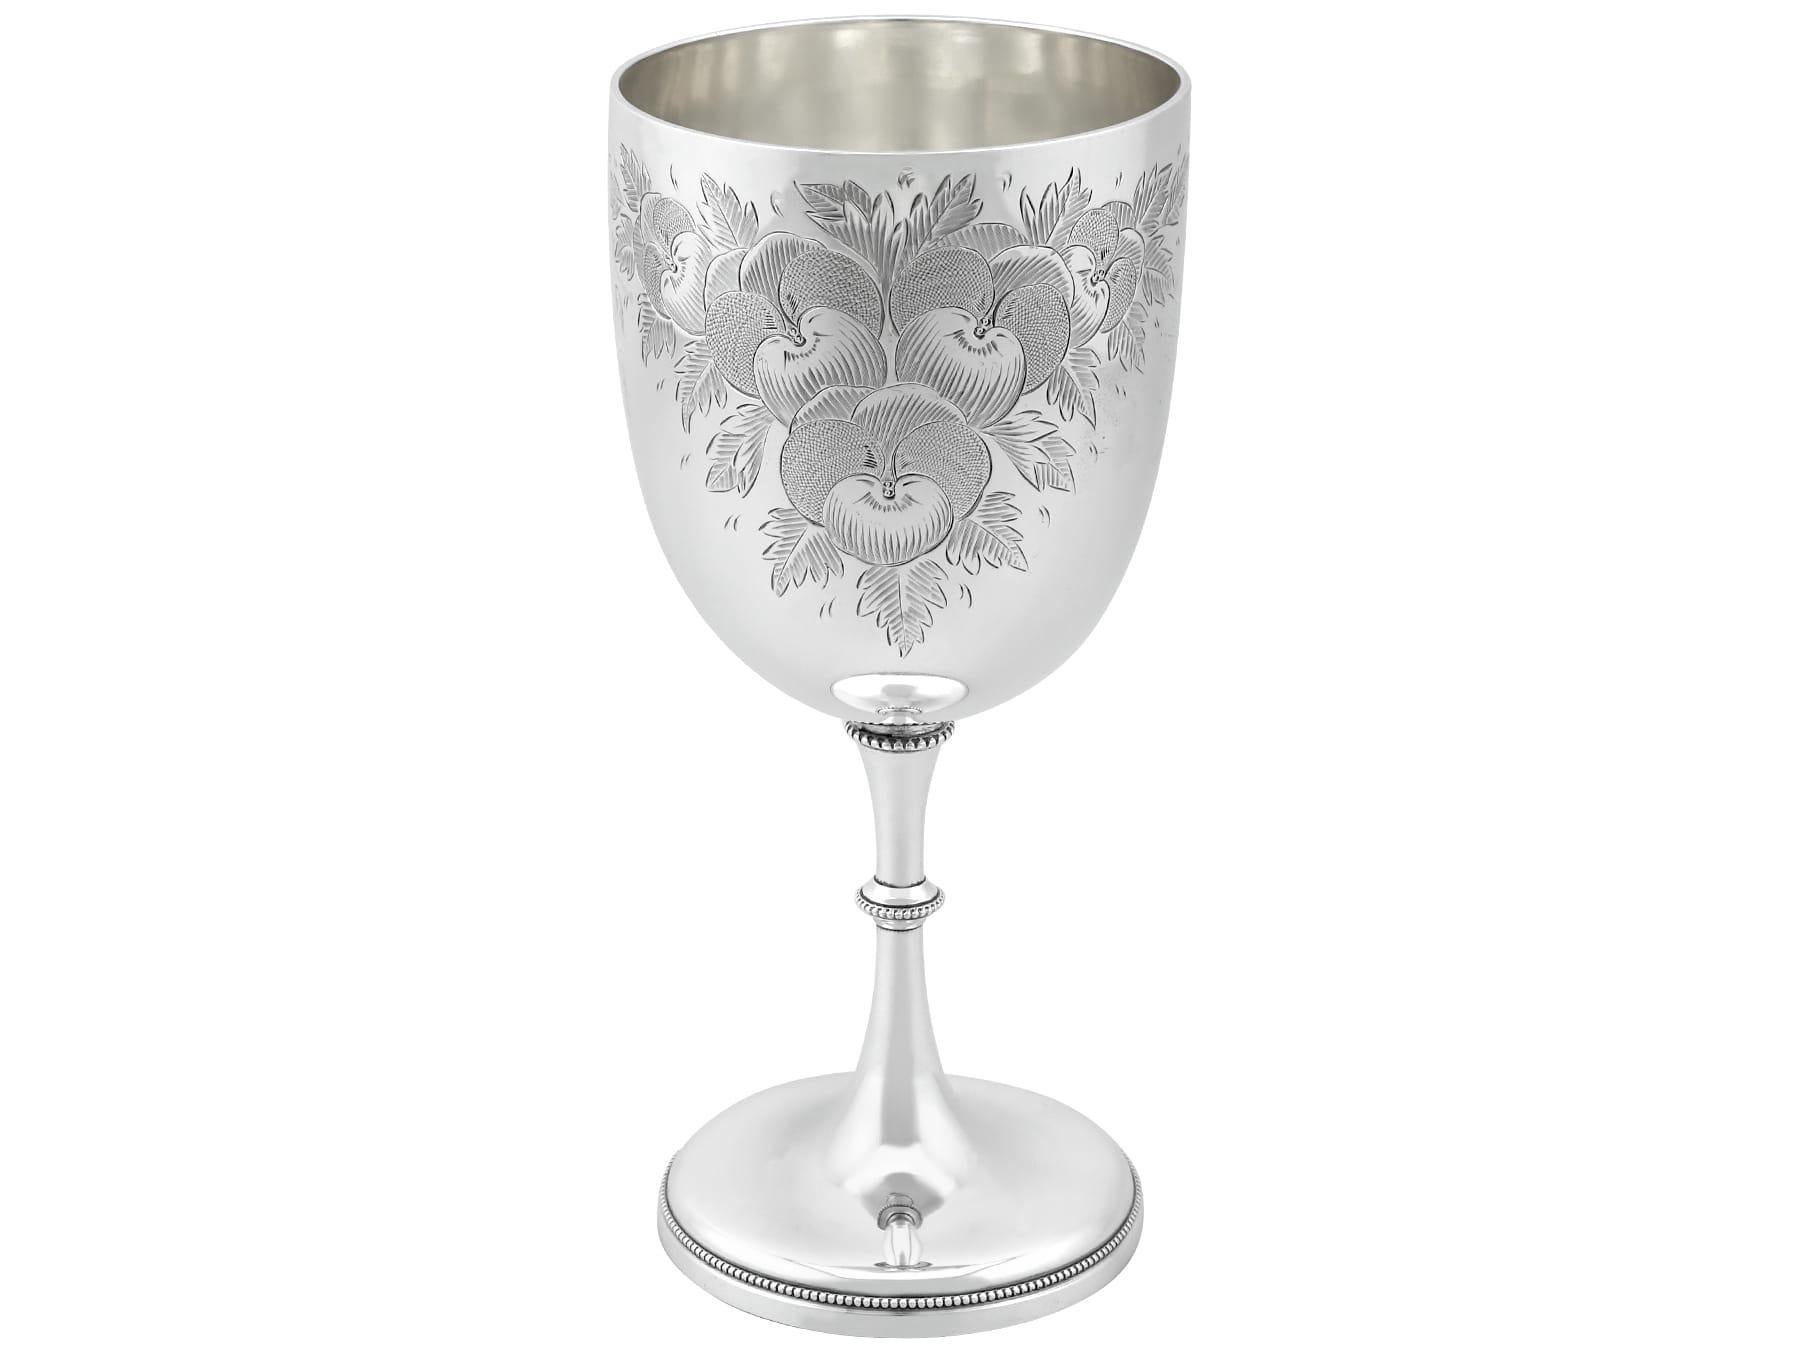 An exceptional, fine and impressive, unusual antique Victorian English sterling silver goblet; an addition to our collection of presentation related silverware.

This exceptional antique Exeter sterling silver goblet has a circular bell-shaped